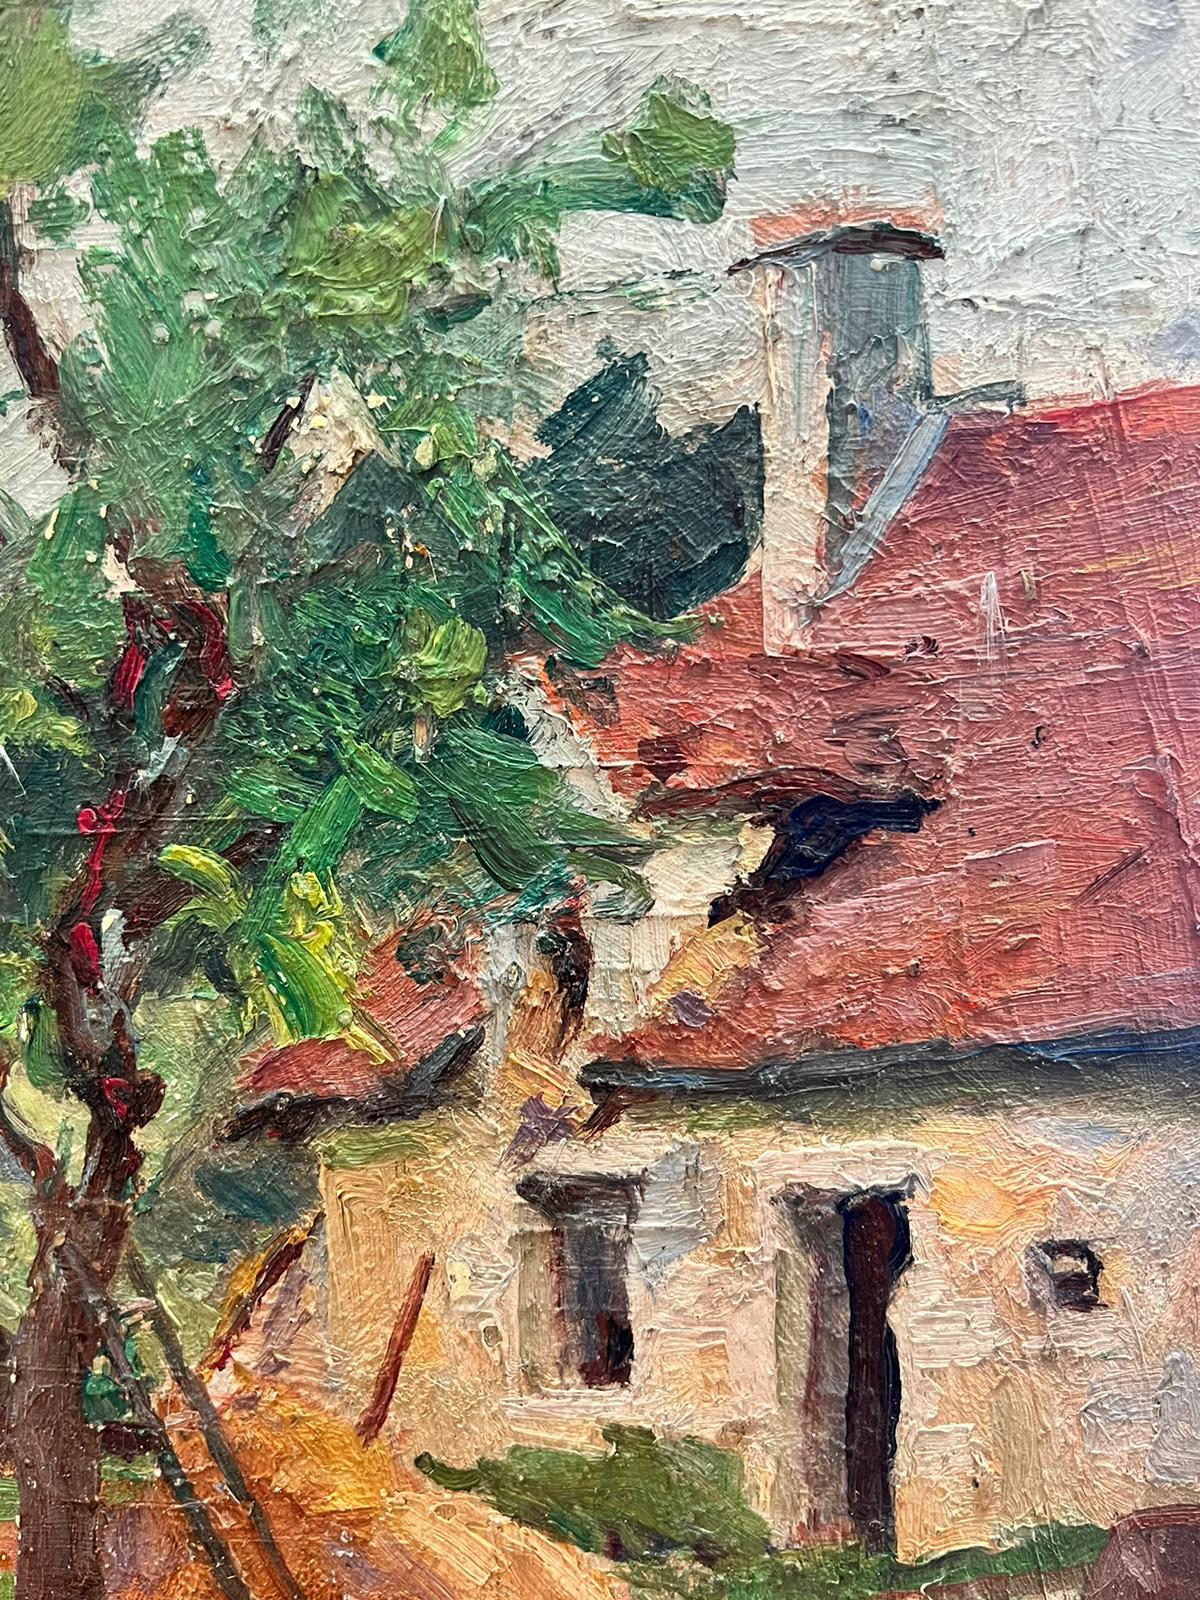 Artist/ School: Suzanne Crochet (French c. 1930), female French Impressionist artist

Title: The Rural Cottage

Medium: oil on board, unframed

Size:

board: 13 x 9.5 inches

Provenance: private collection, France

Condition: The painting is in